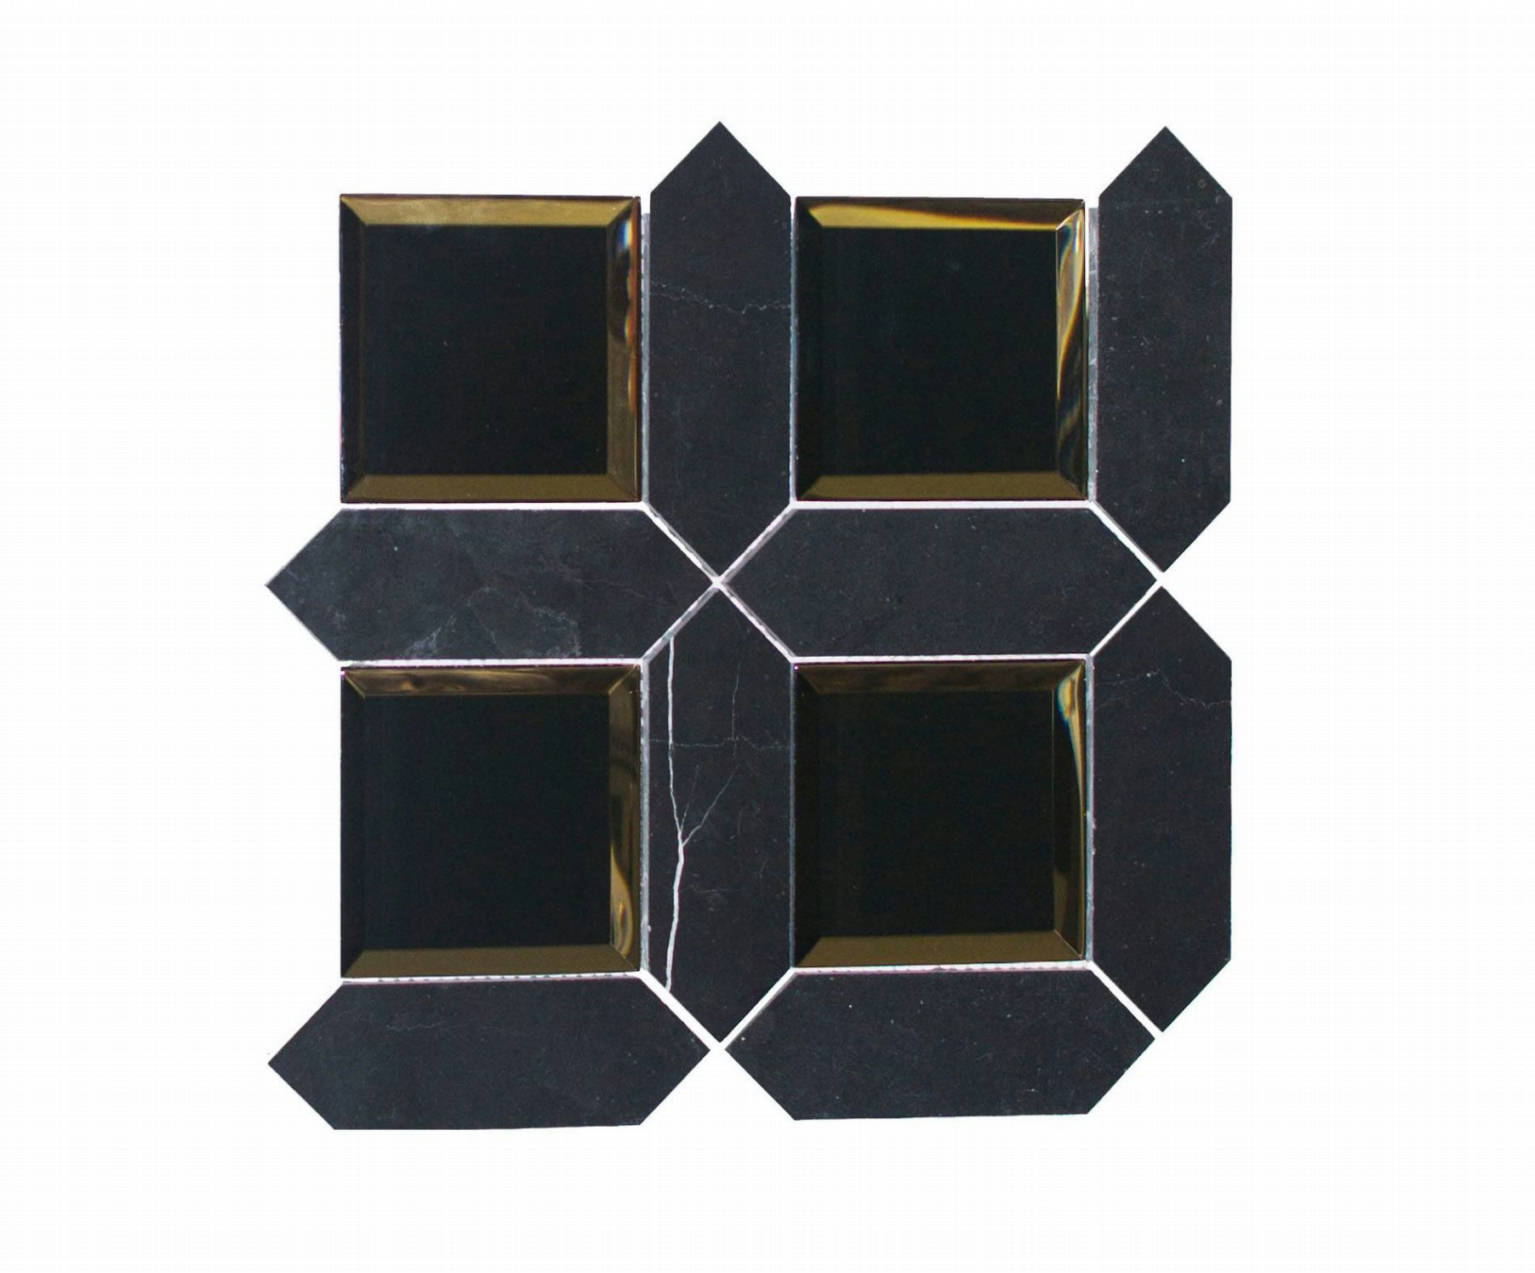 WAB008 | Stones & More | Finest selection of Mosaics, Glass, Tile and Stone